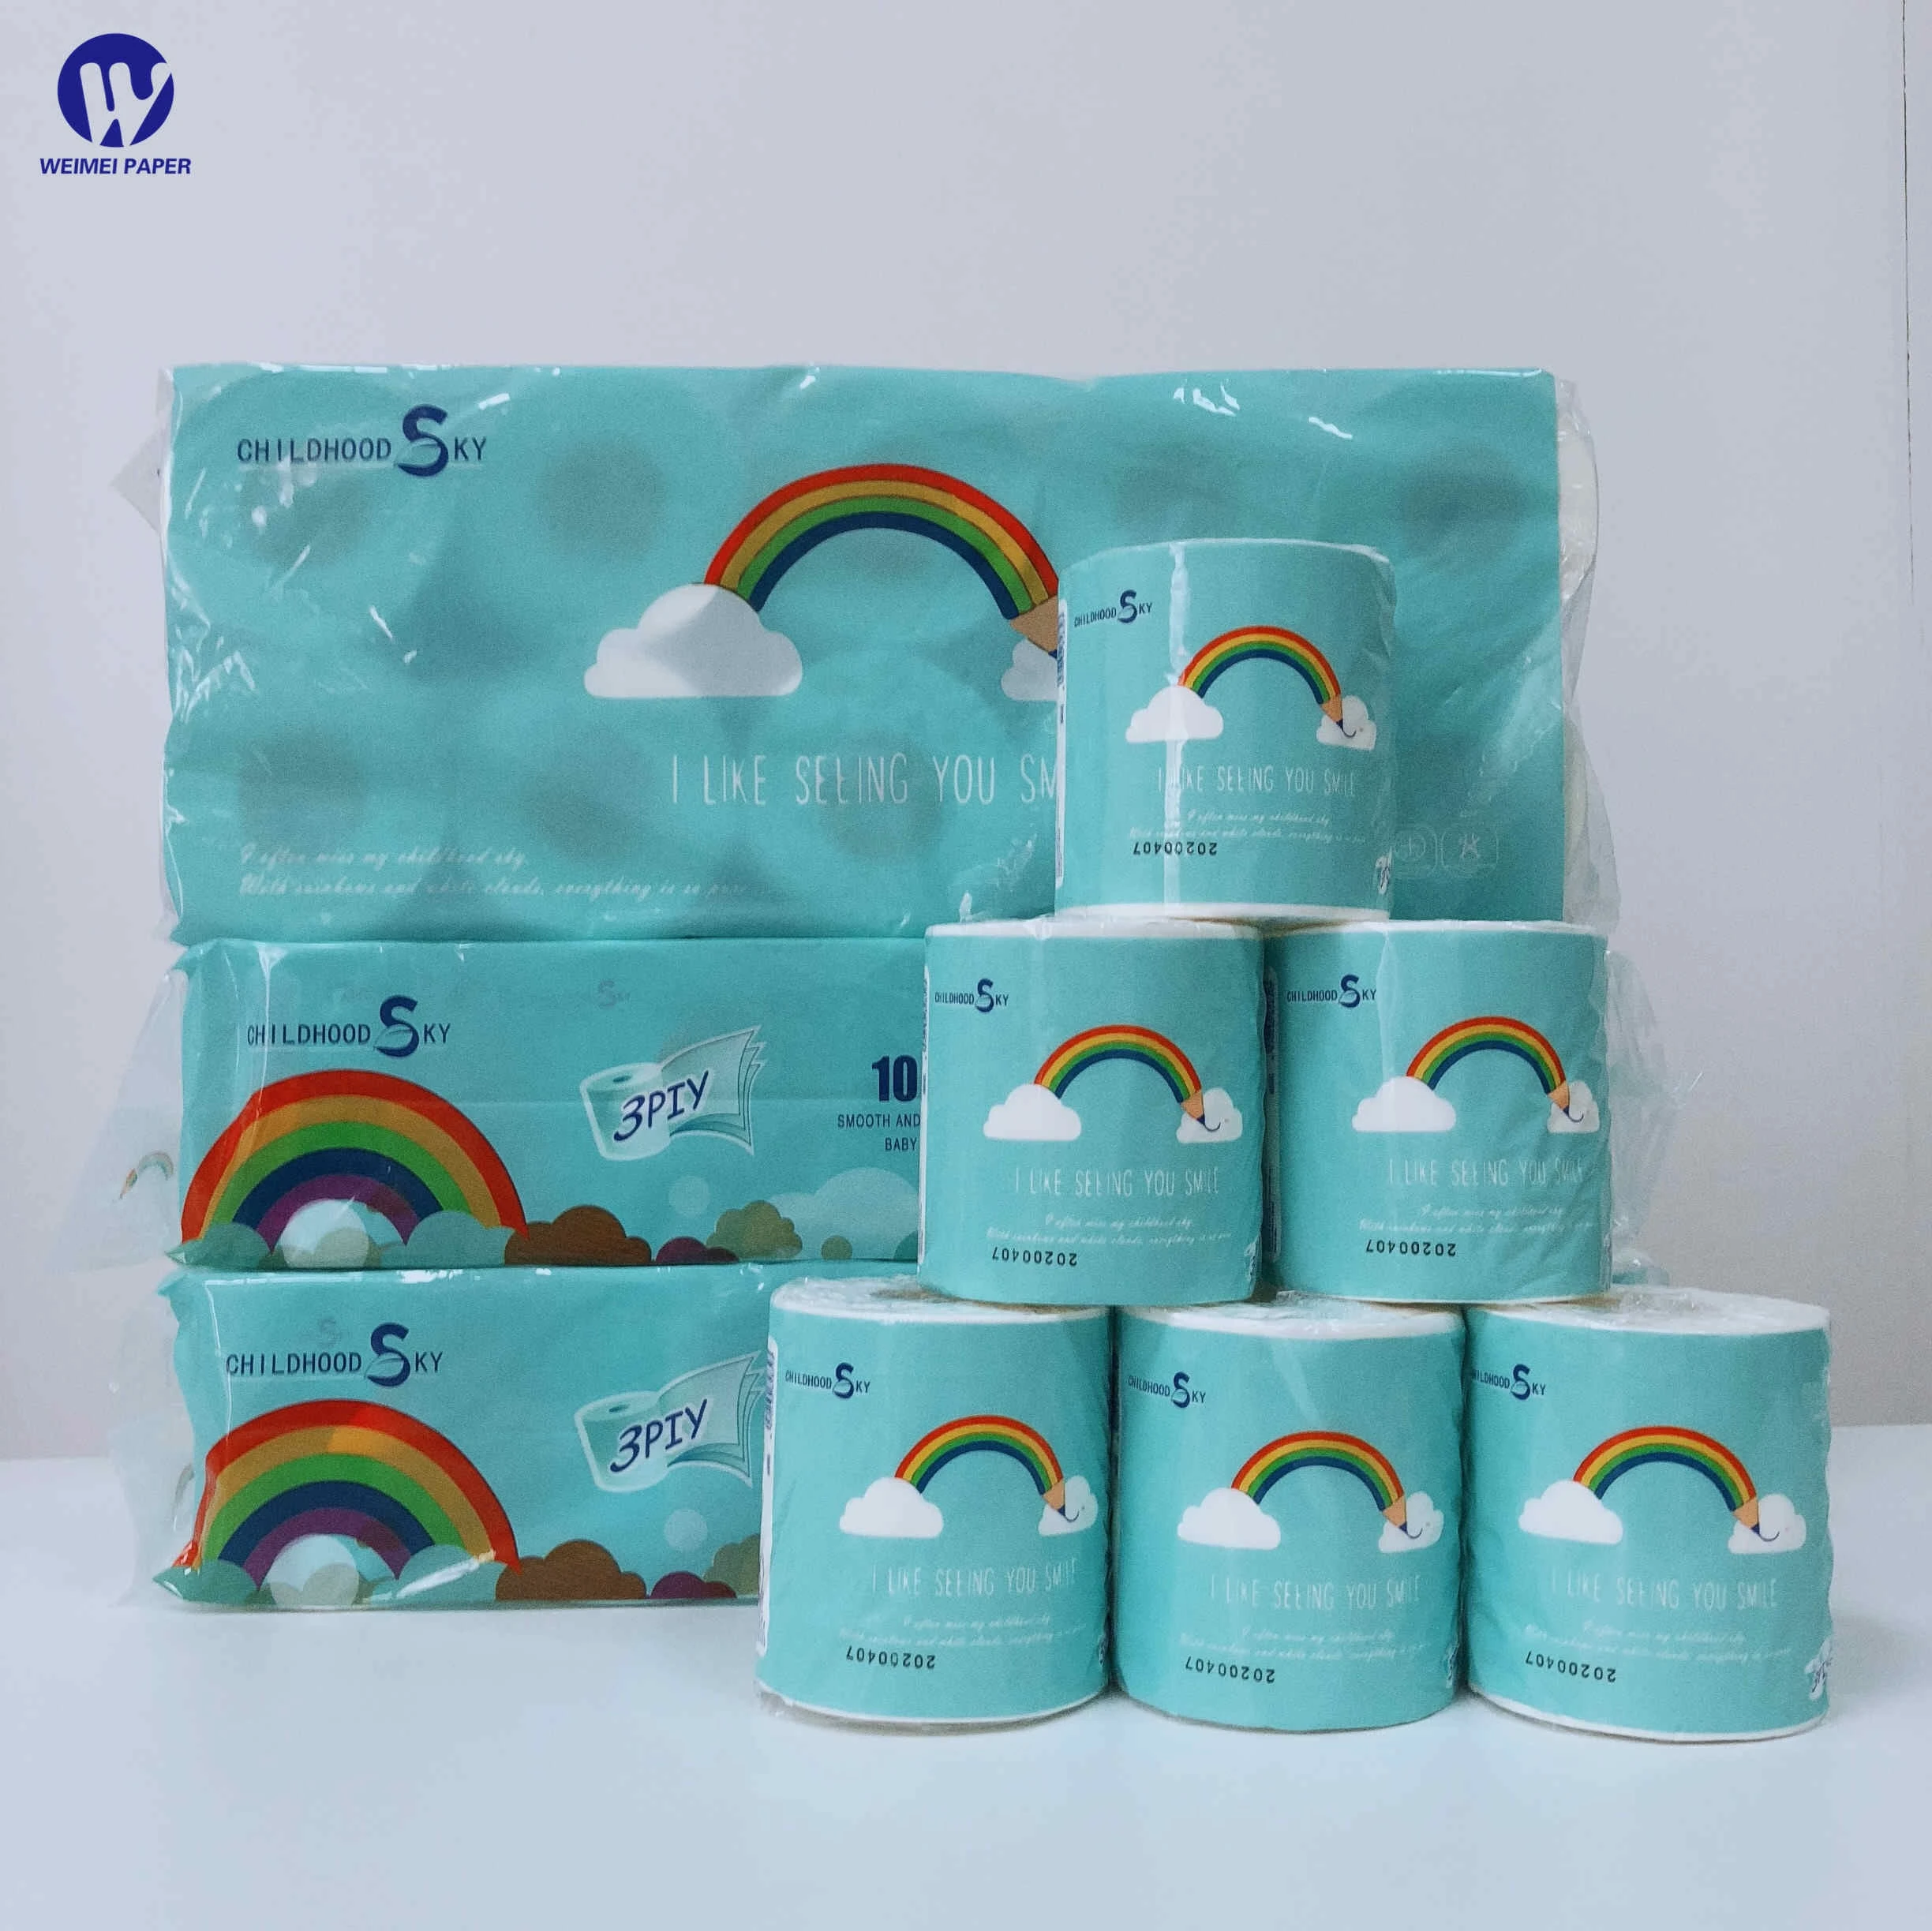 3-layer high-quality toilet paper, 100% virgin wood pulp, fast shipping Toilet tissue